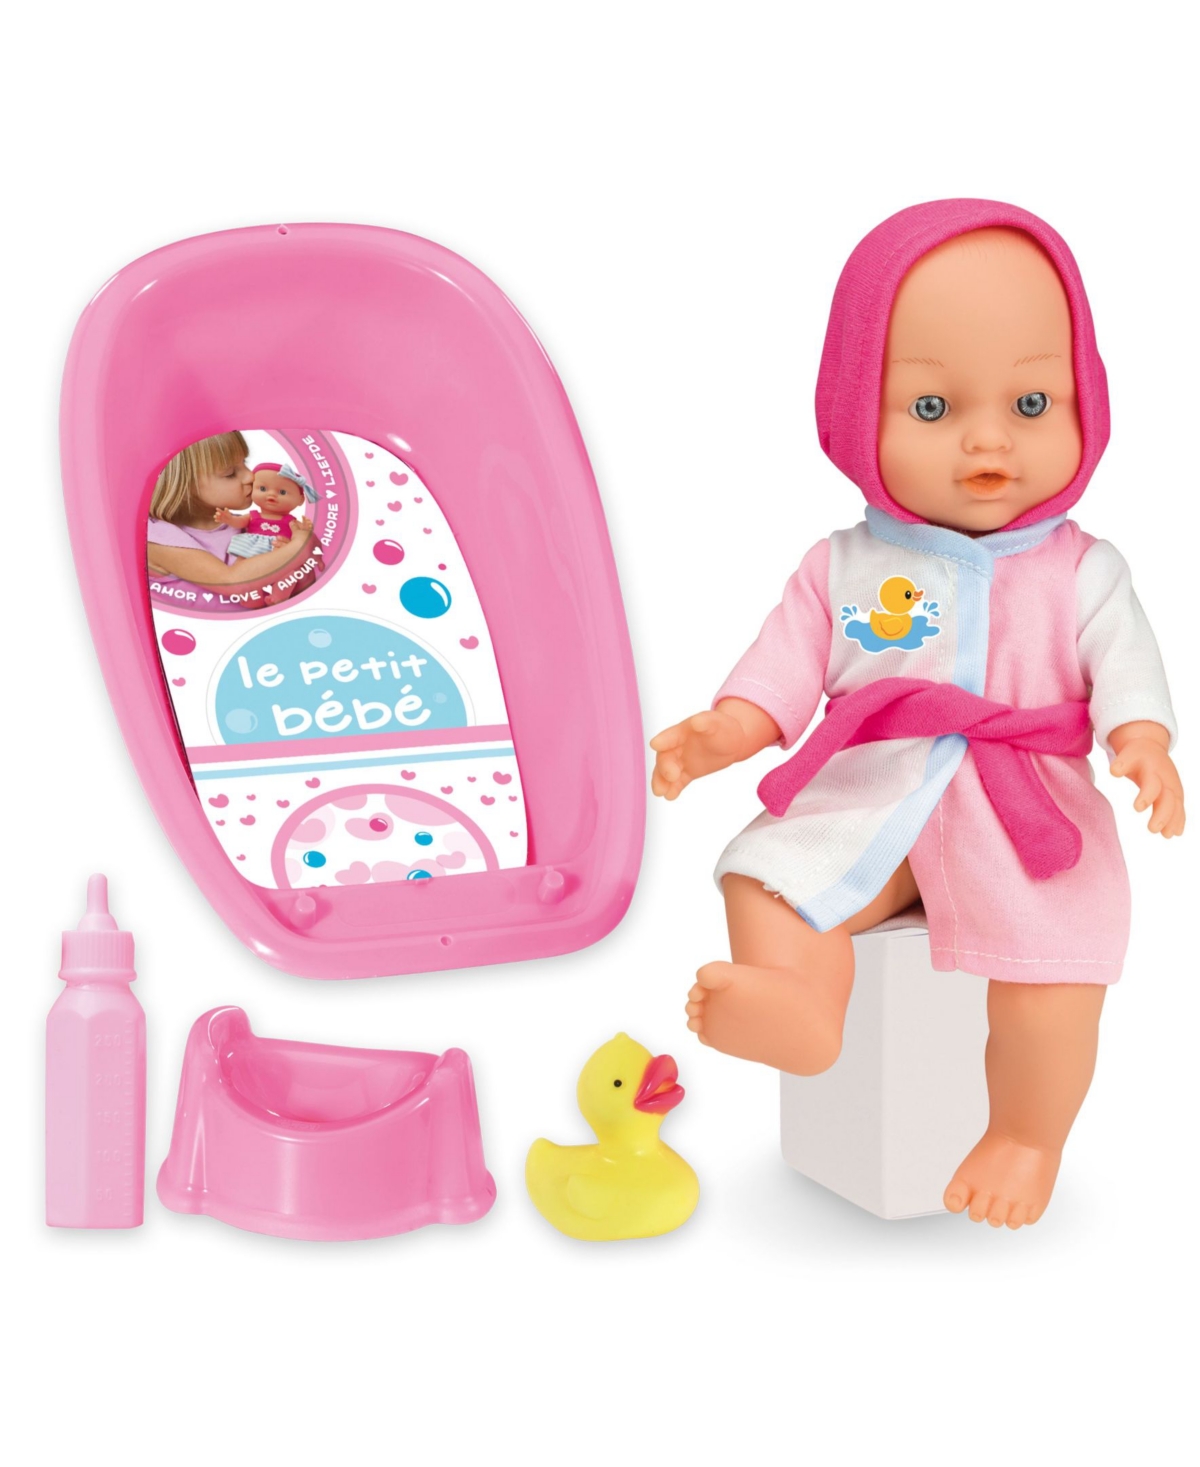 Flat River Group Loko Toys Le Petite Baby Doll Bath Time And Potty Play Set, 5 Piece In Multi